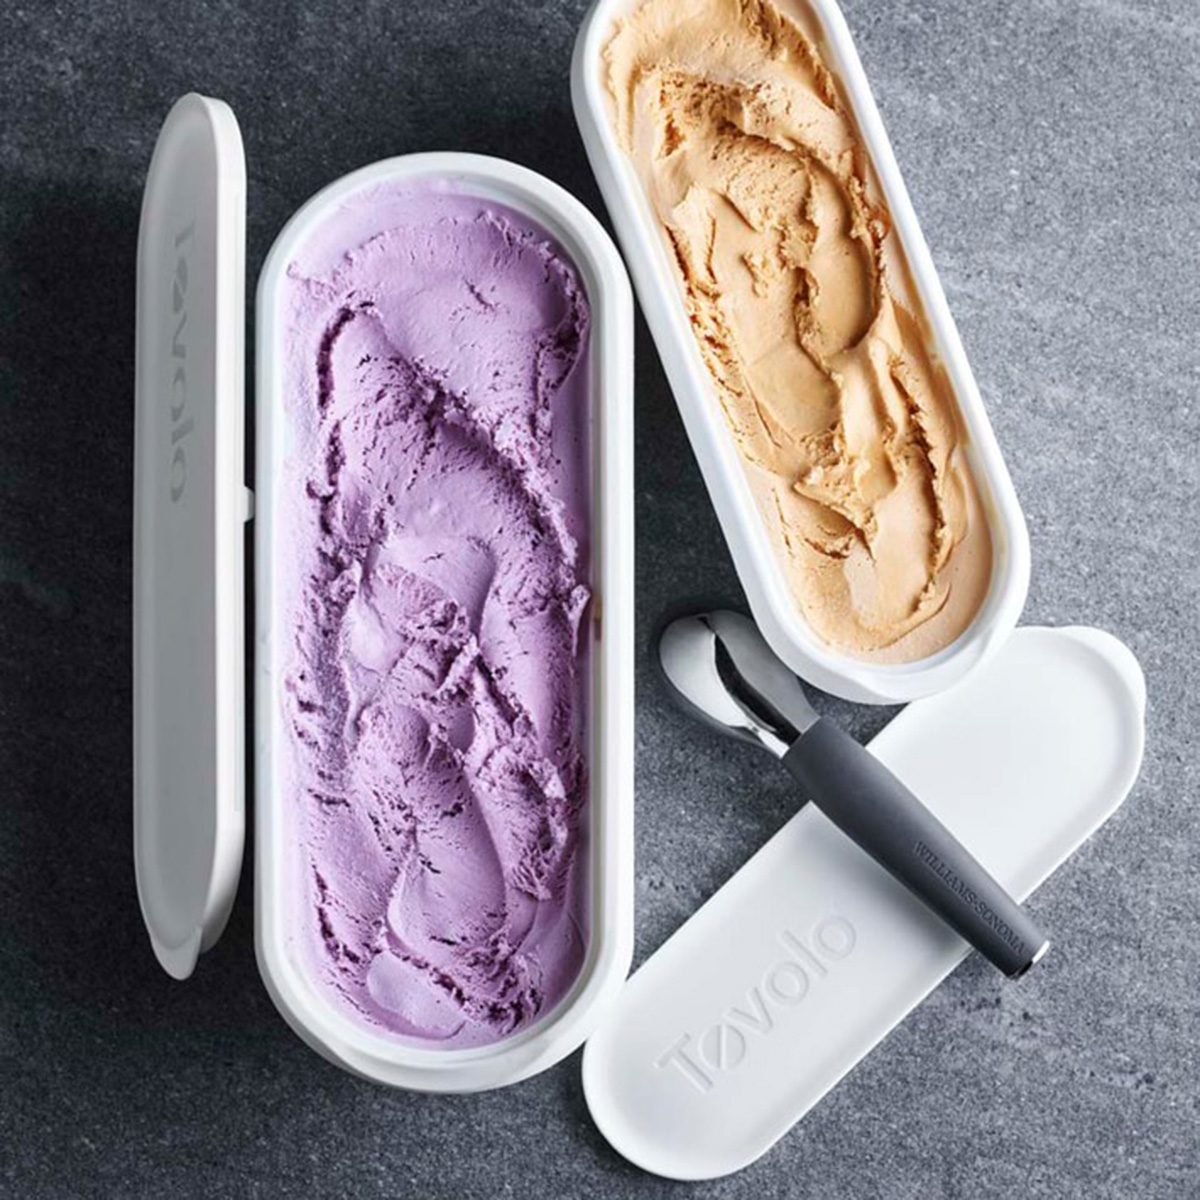 Top 10 Ice Cream Accessories and Tools - Adventures of Mel